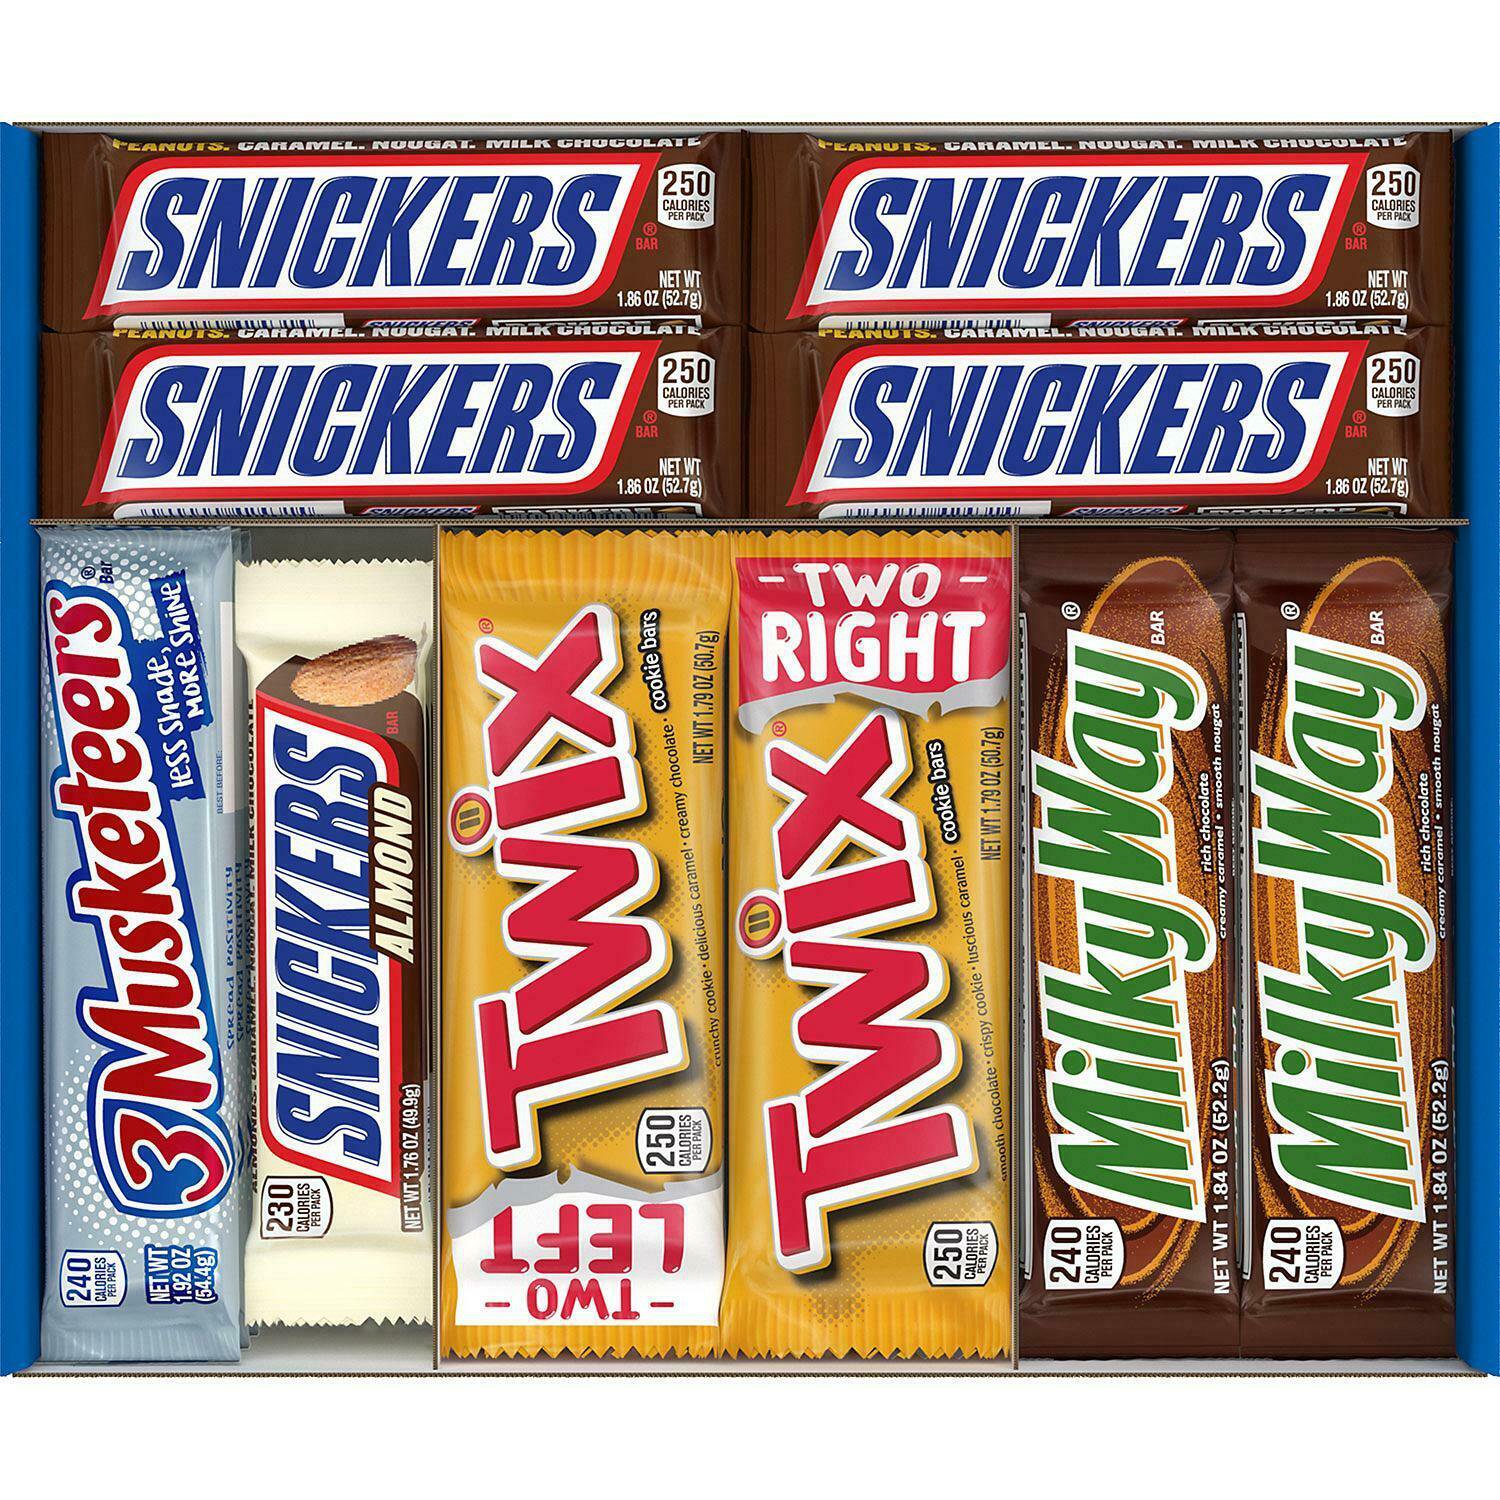 Mars Full Size Candy Bars Snickers Almond Twix 3 Musketeers Variety ...